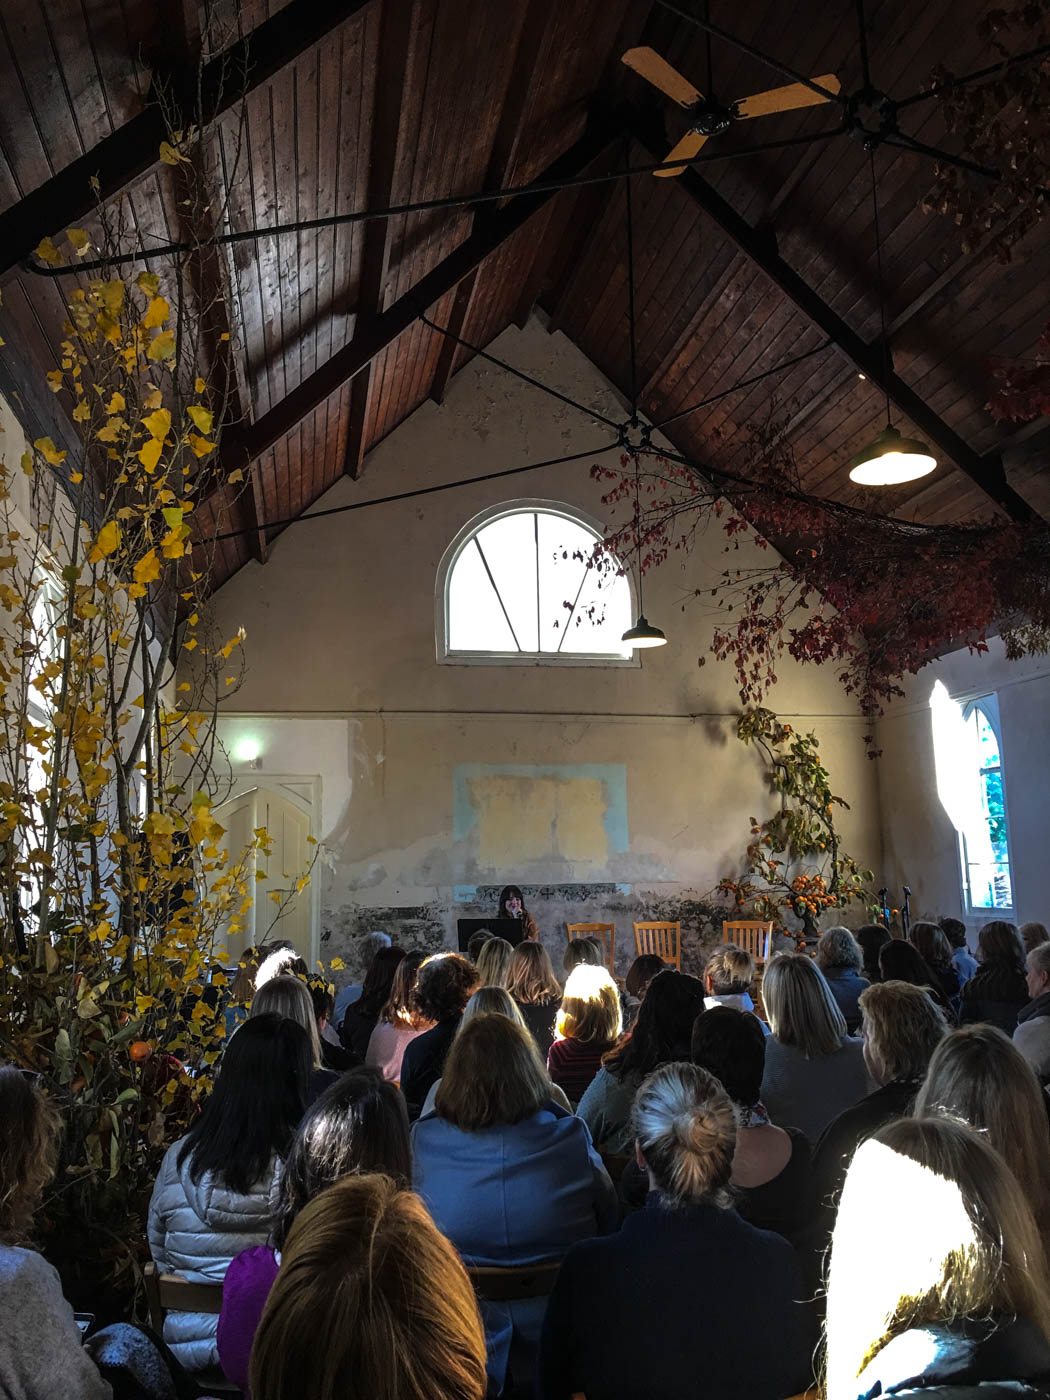 Inside the convent, workshop attendees